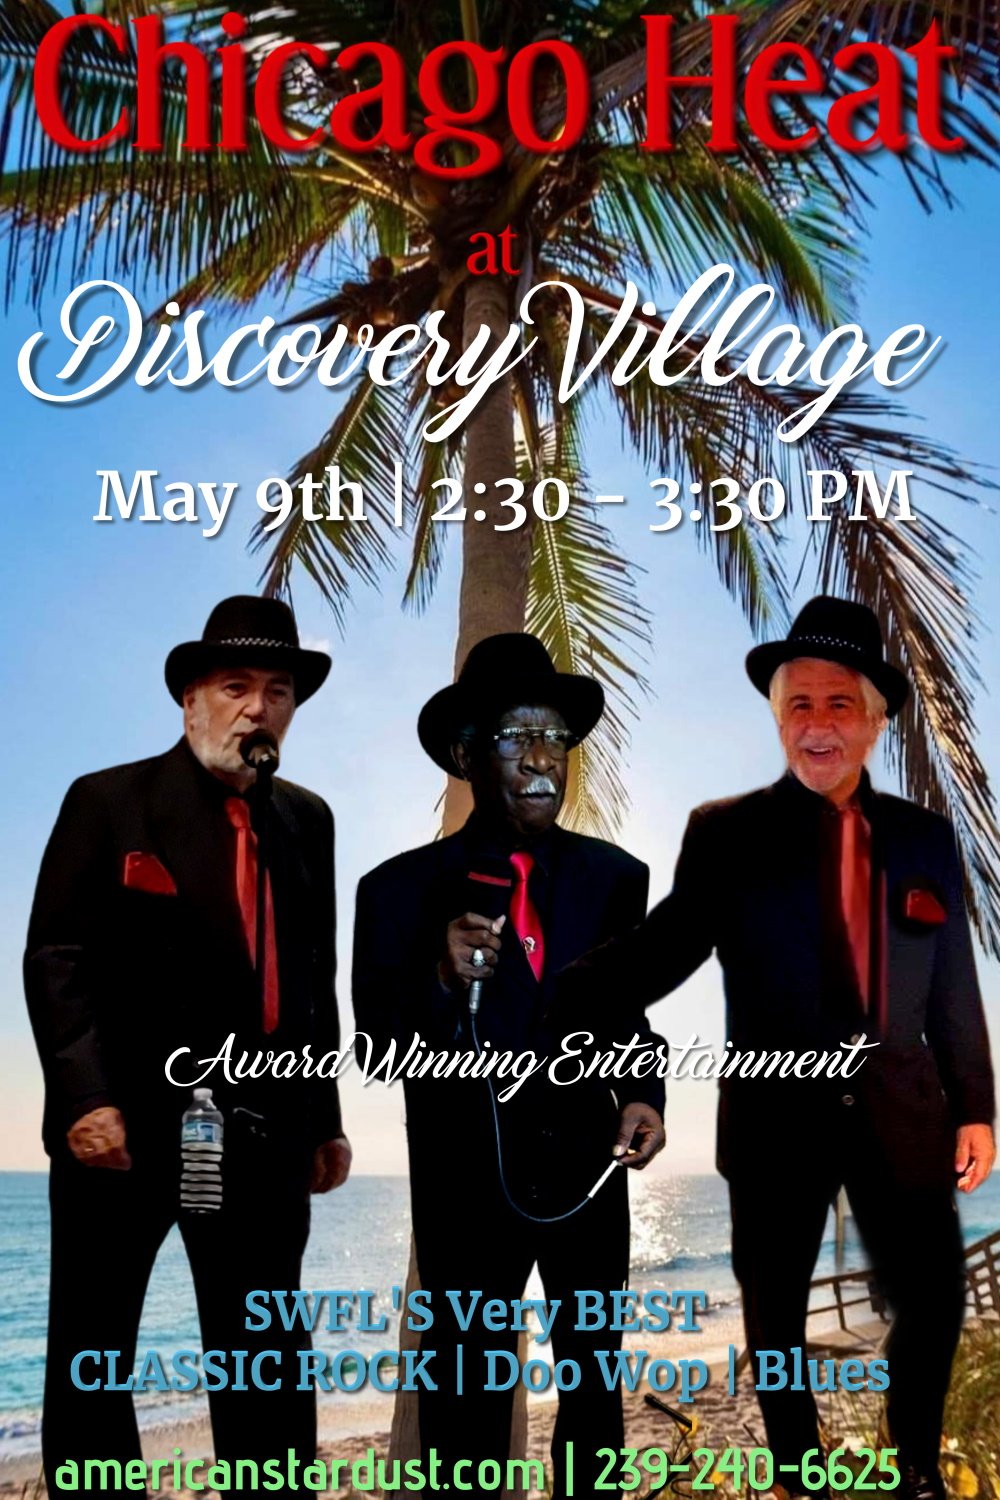 Discovery Village may 9th.jpg